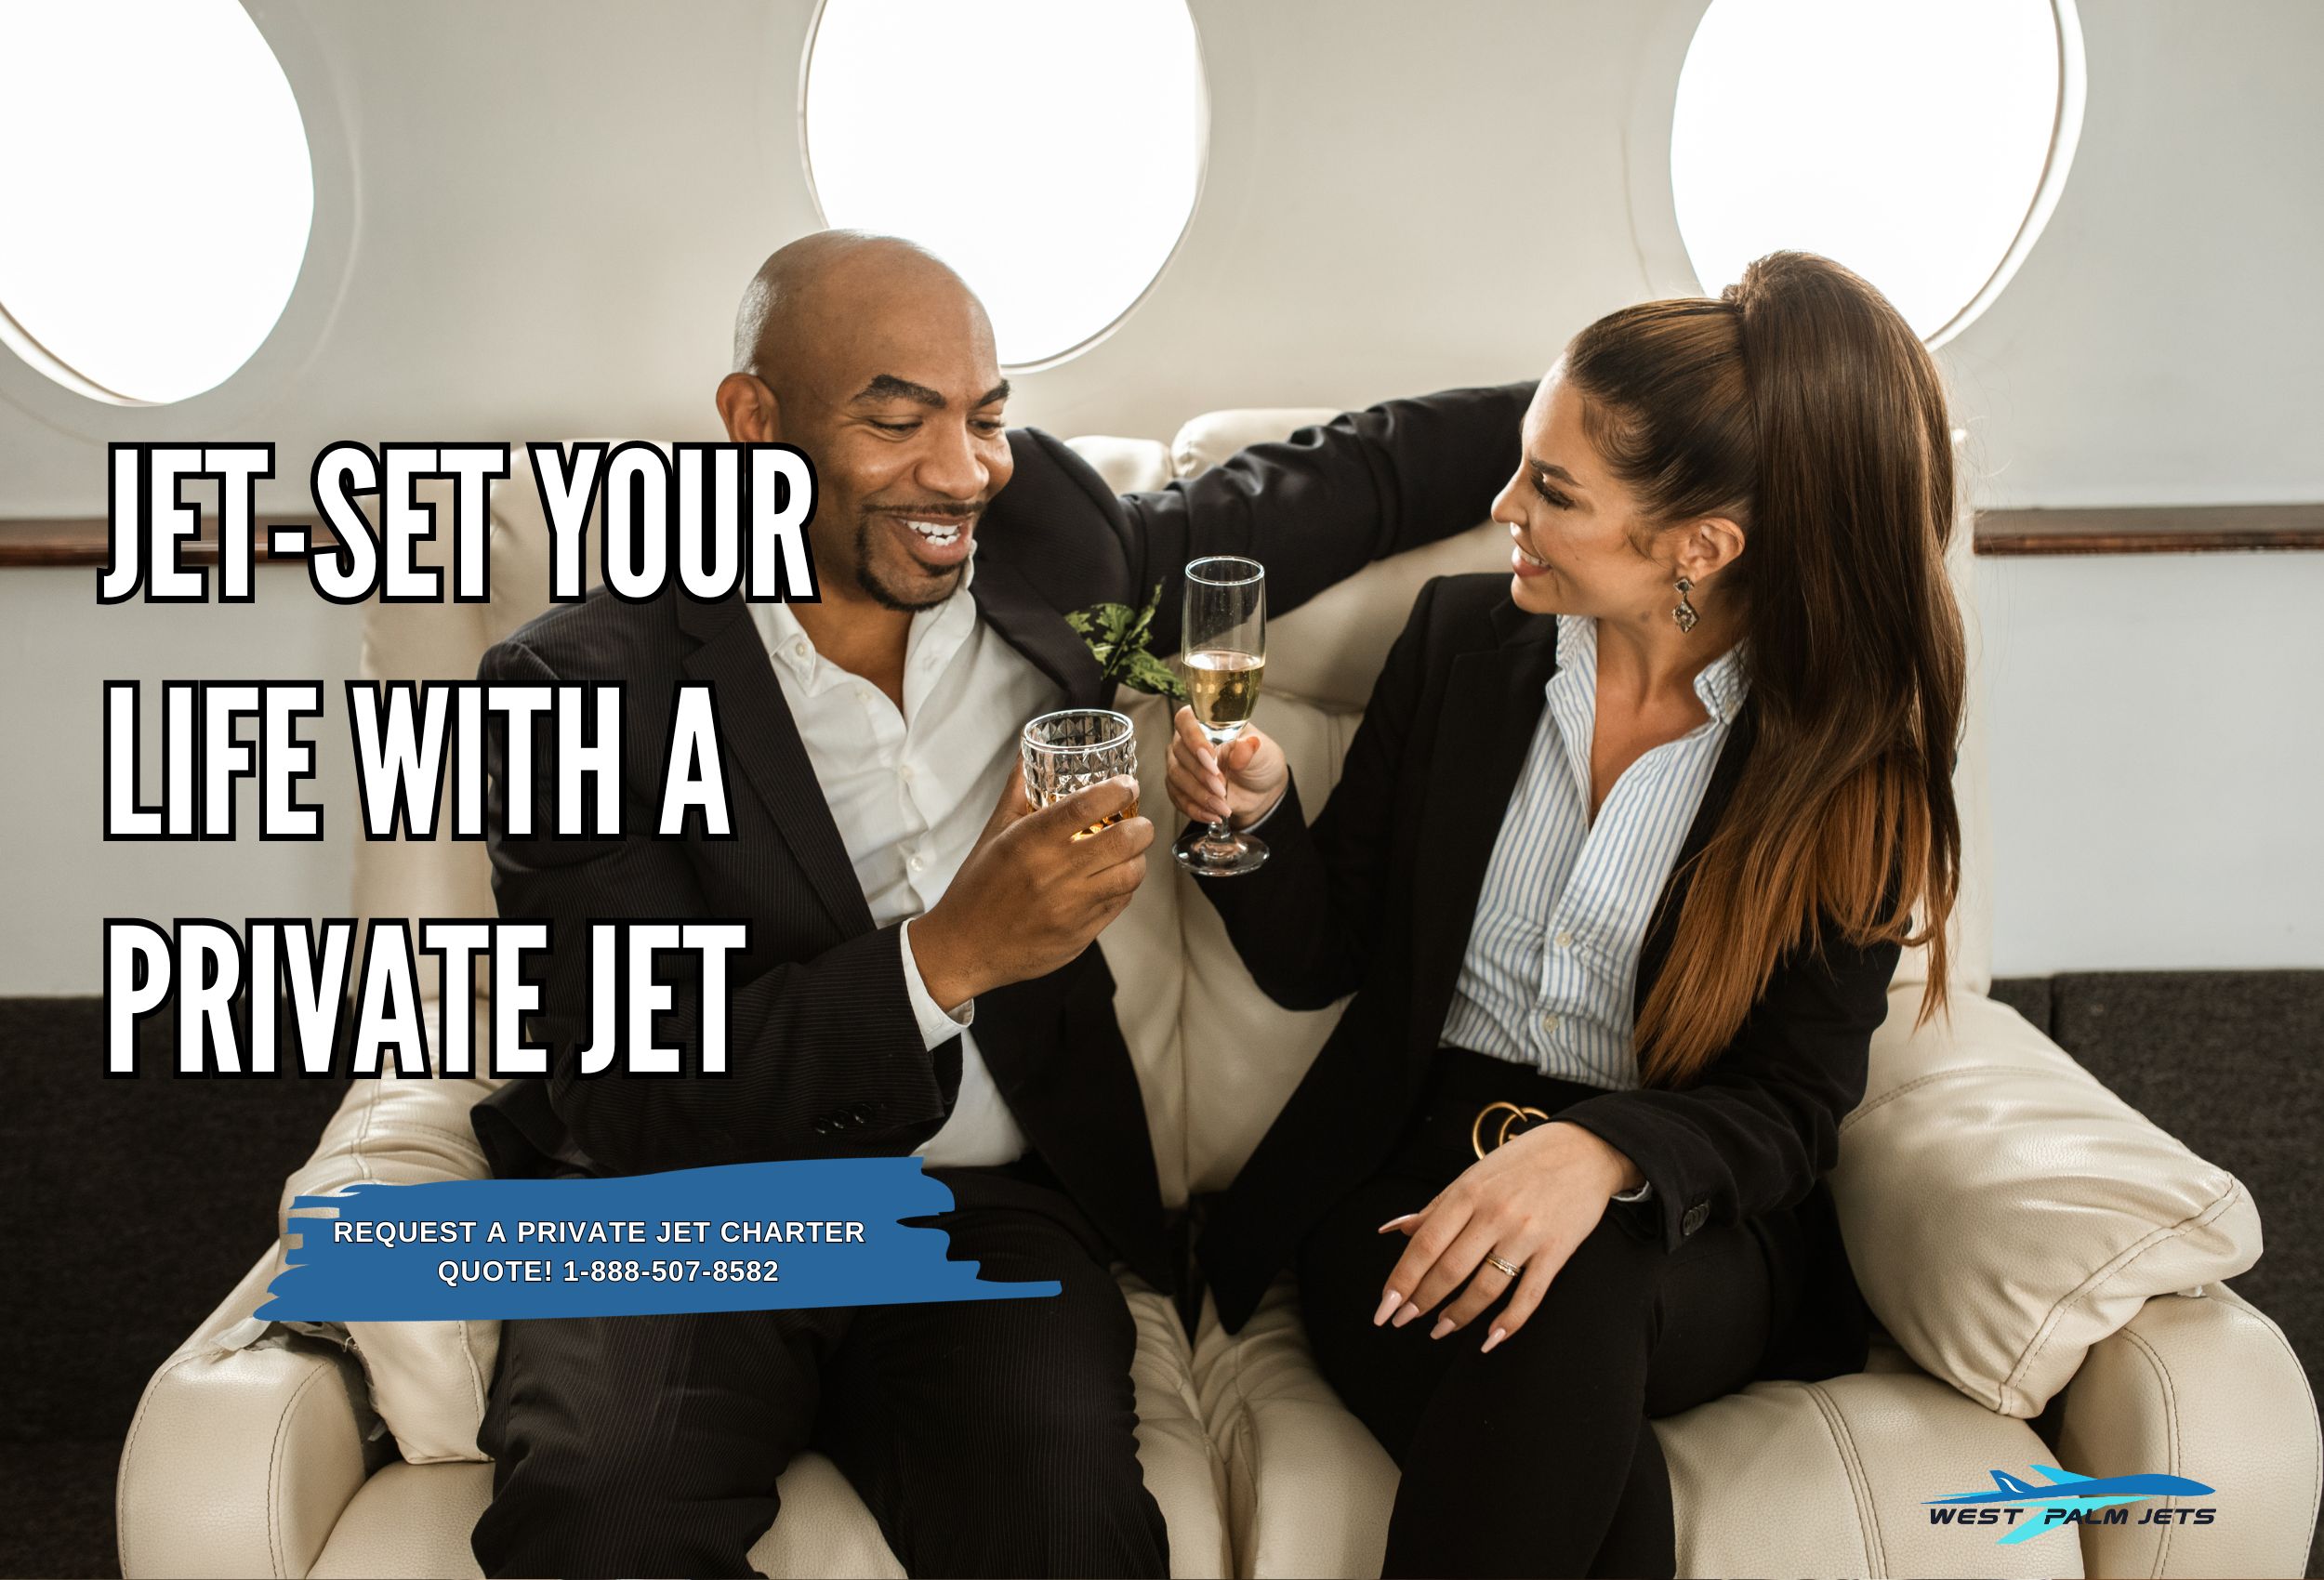 JETSET YOUR LIFE WITH A PRIVATE JET